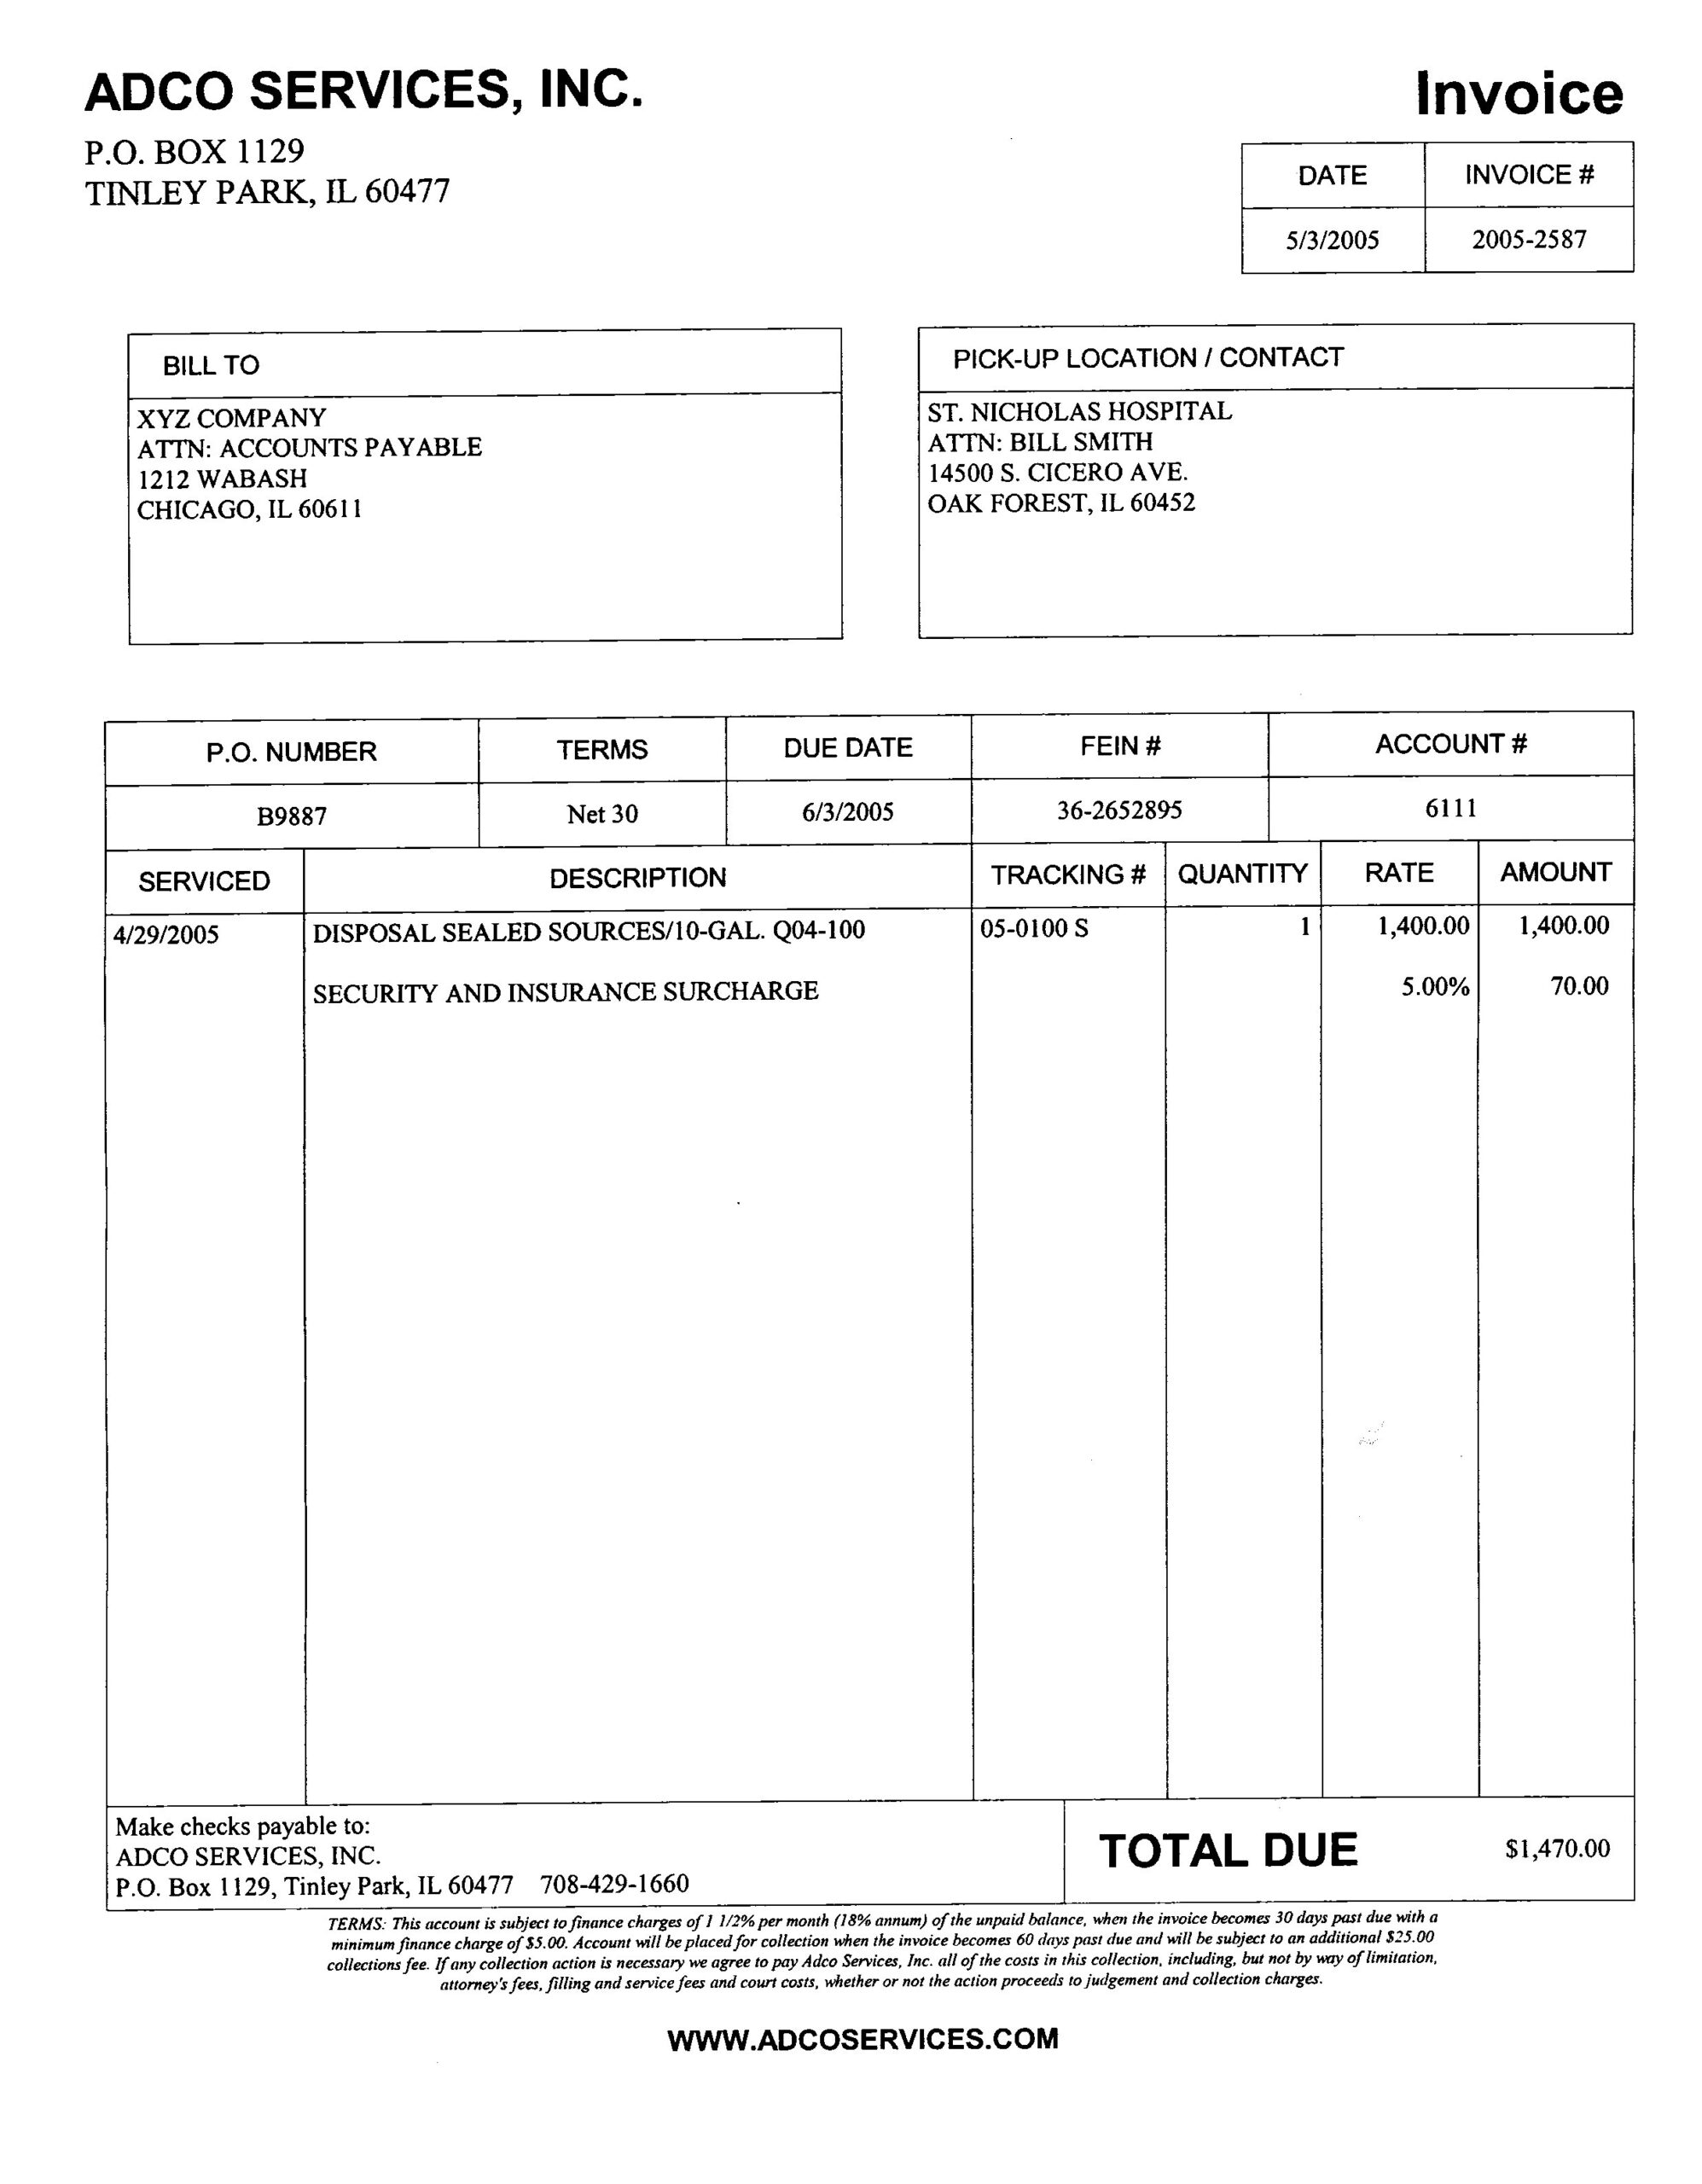 Simple Inventory Invoice Software | Free Resume Templates Intended For Net 30 Invoice Template